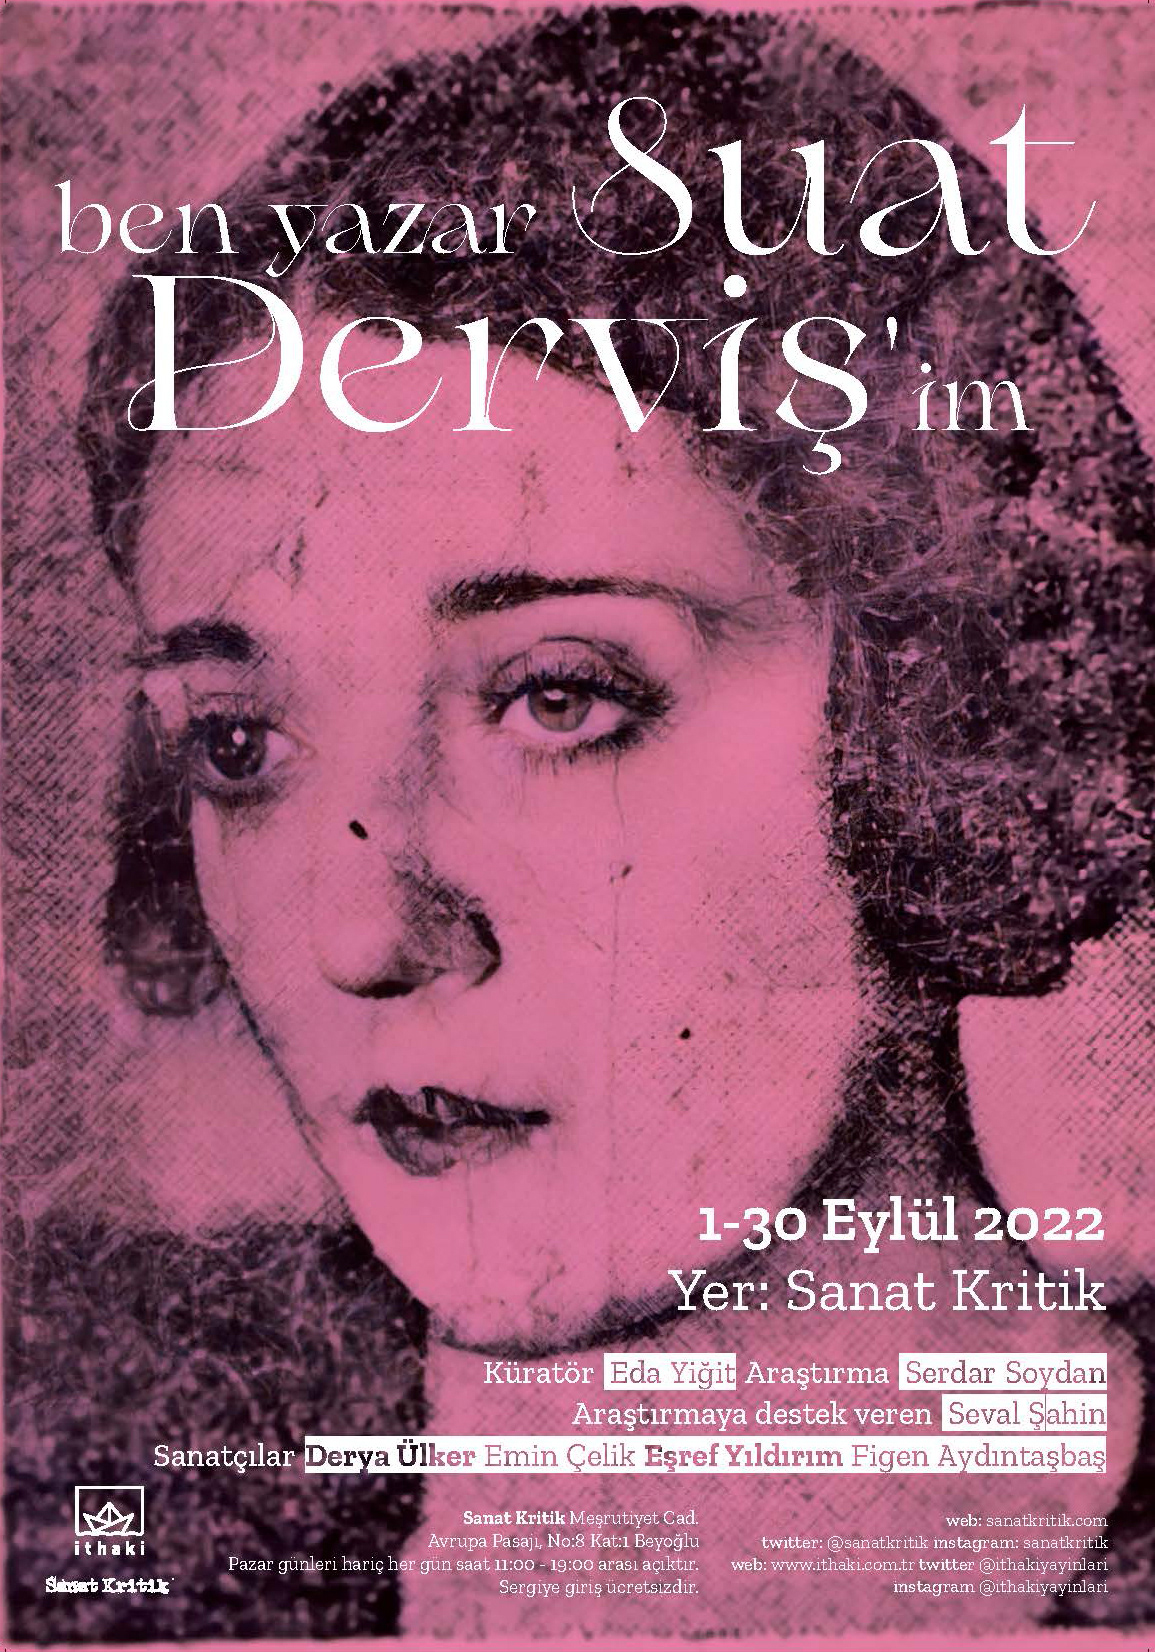 Author feminist glass lettering punctuation typhography newspaper 1930s suat derviş